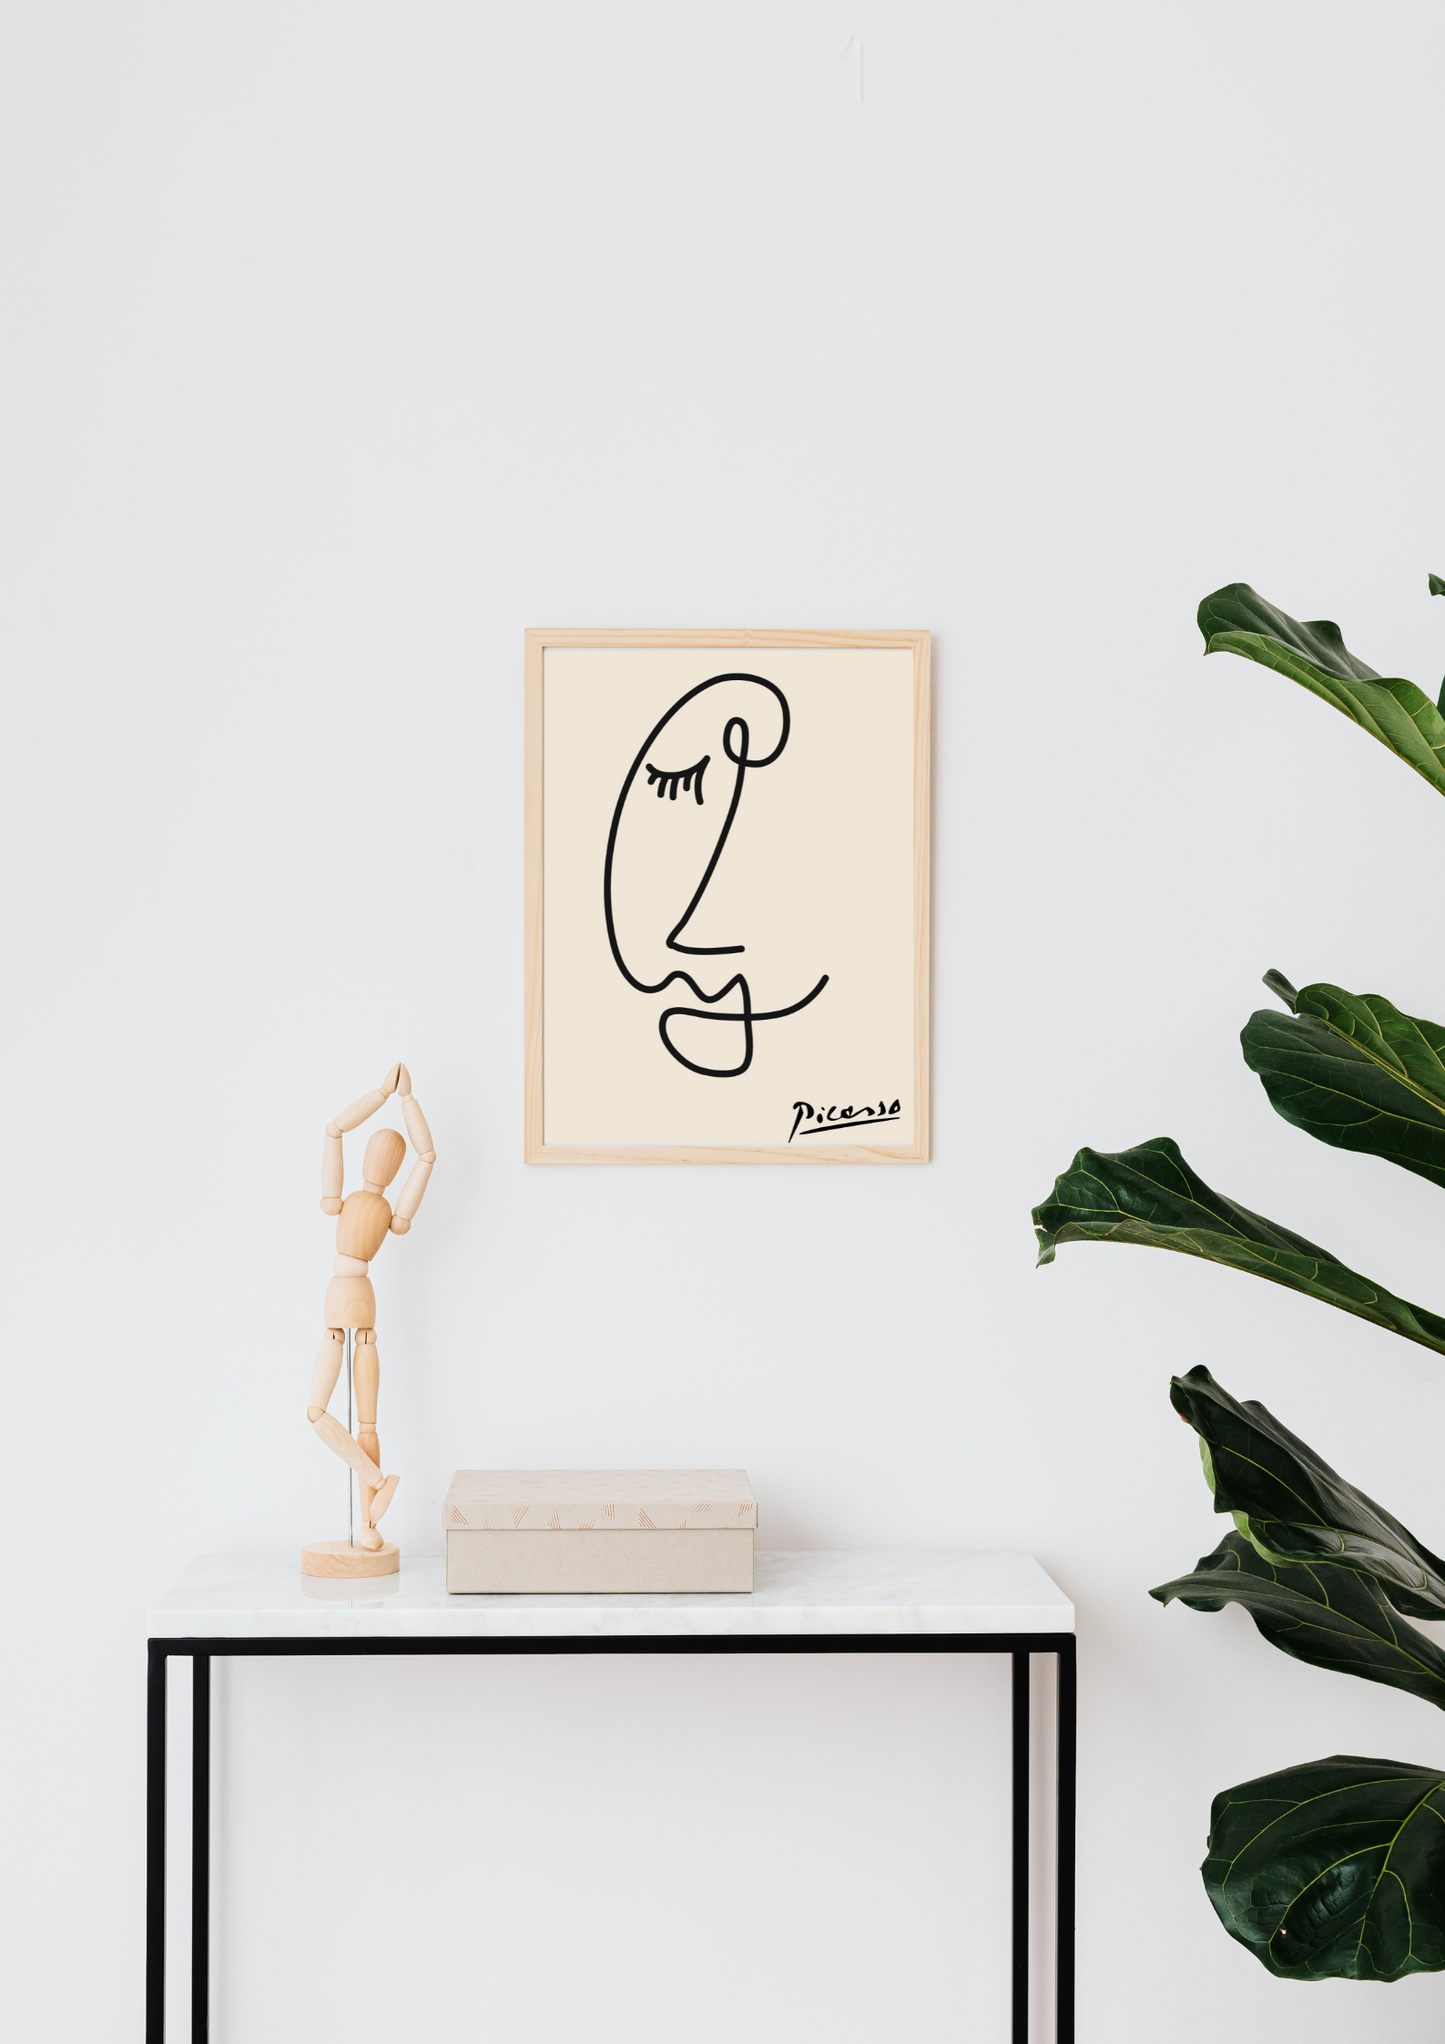 Picasso One Line Poster